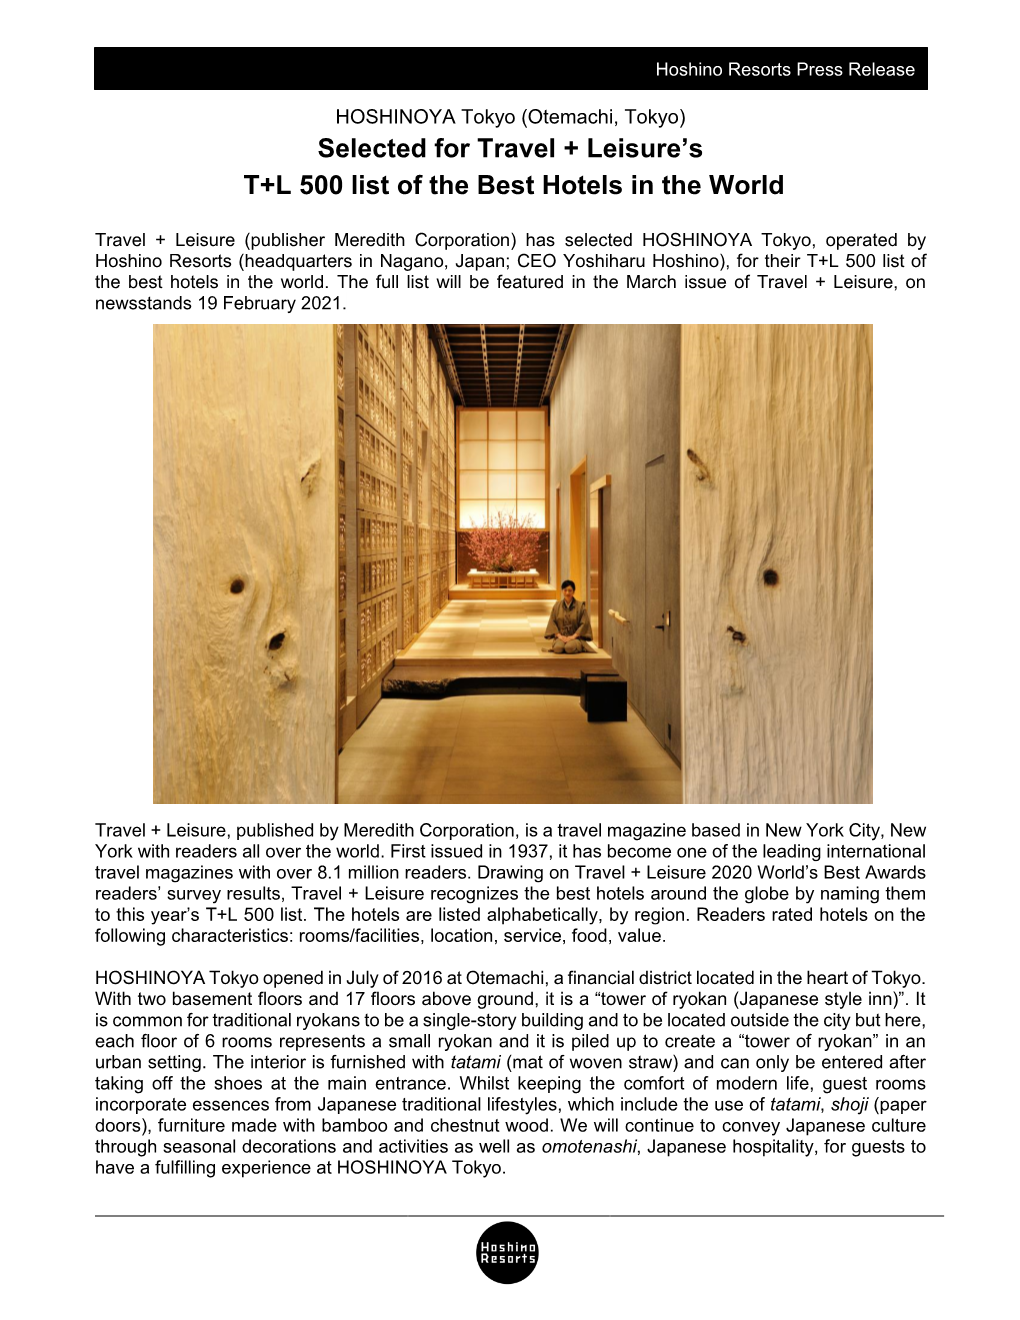 Selected for Travel + Leisure's T+L 500 List of the Best Hotels in the World